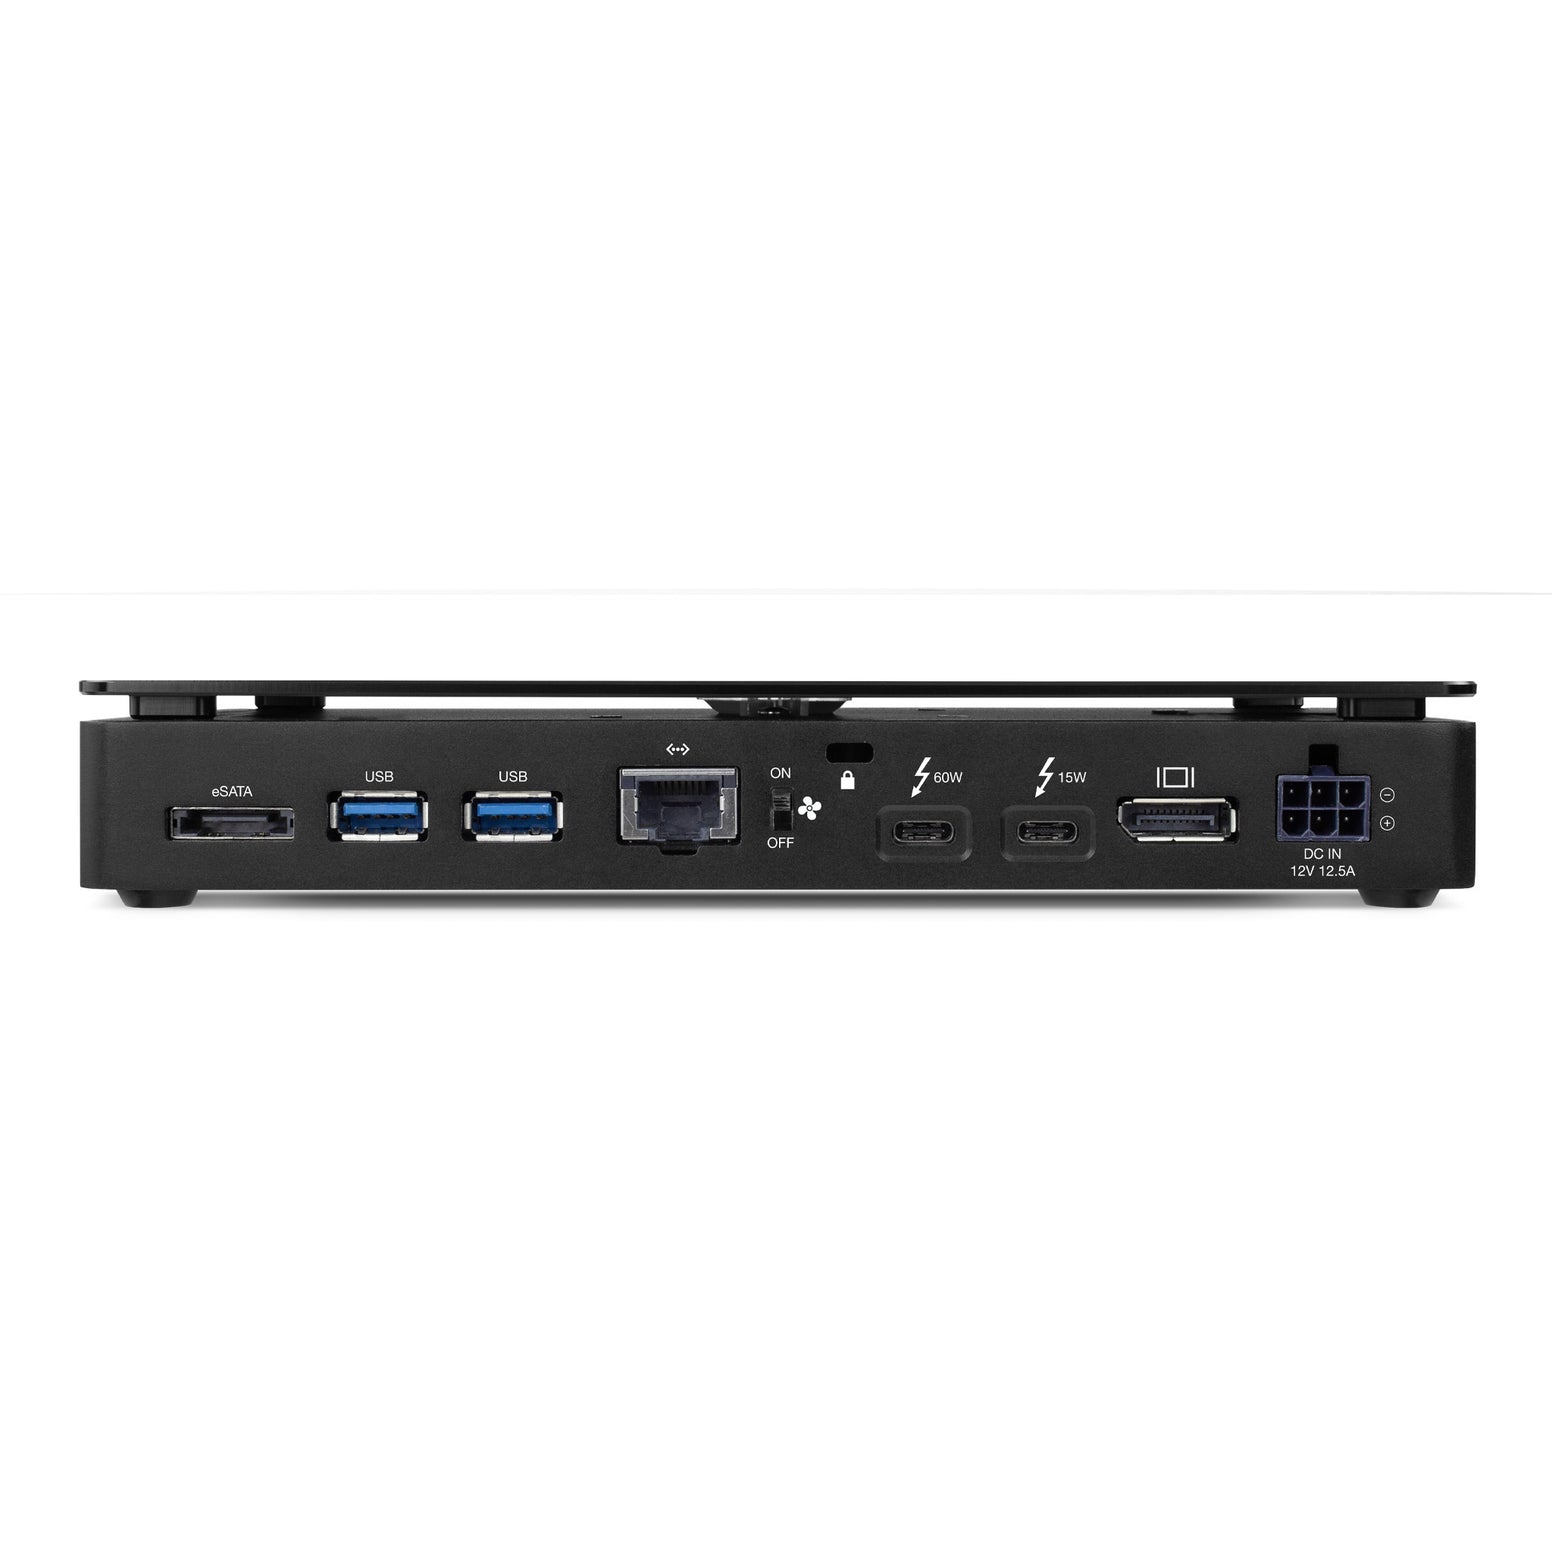 OWC Thunderbolt 3 Pro Dock - Discontinued